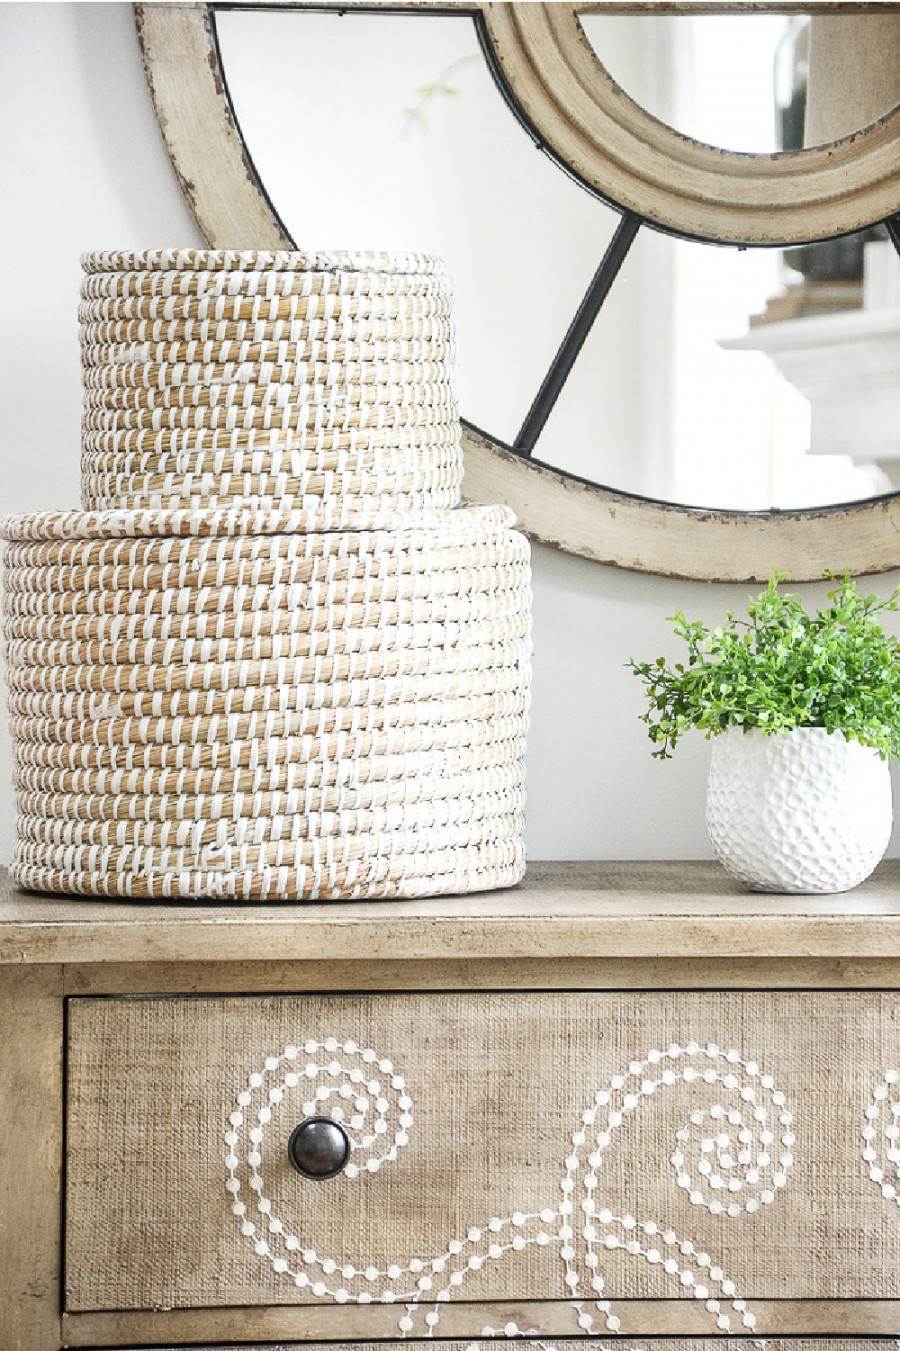 HOW TO ADD BASKETS TO YOUR HOME DECOR